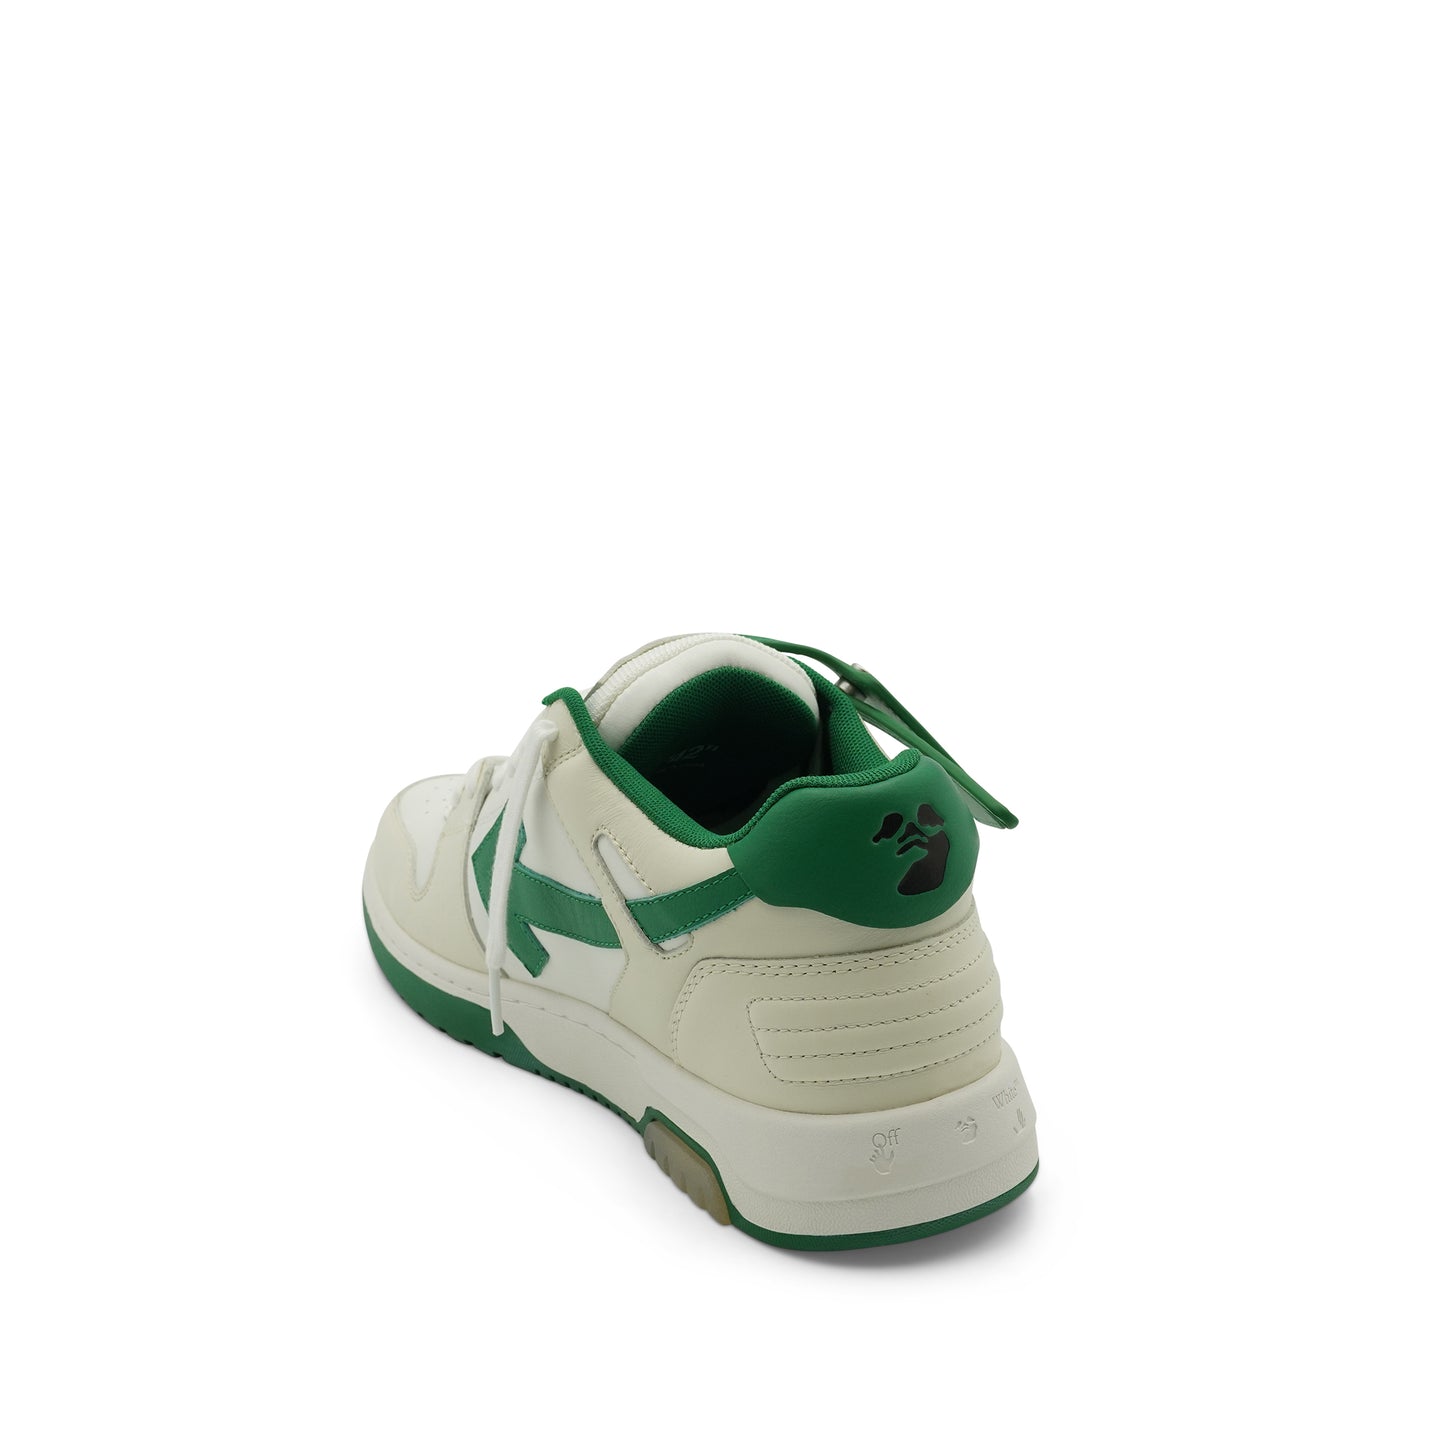 Out Of Office Calf Leather Sneaker in Pristine/Green